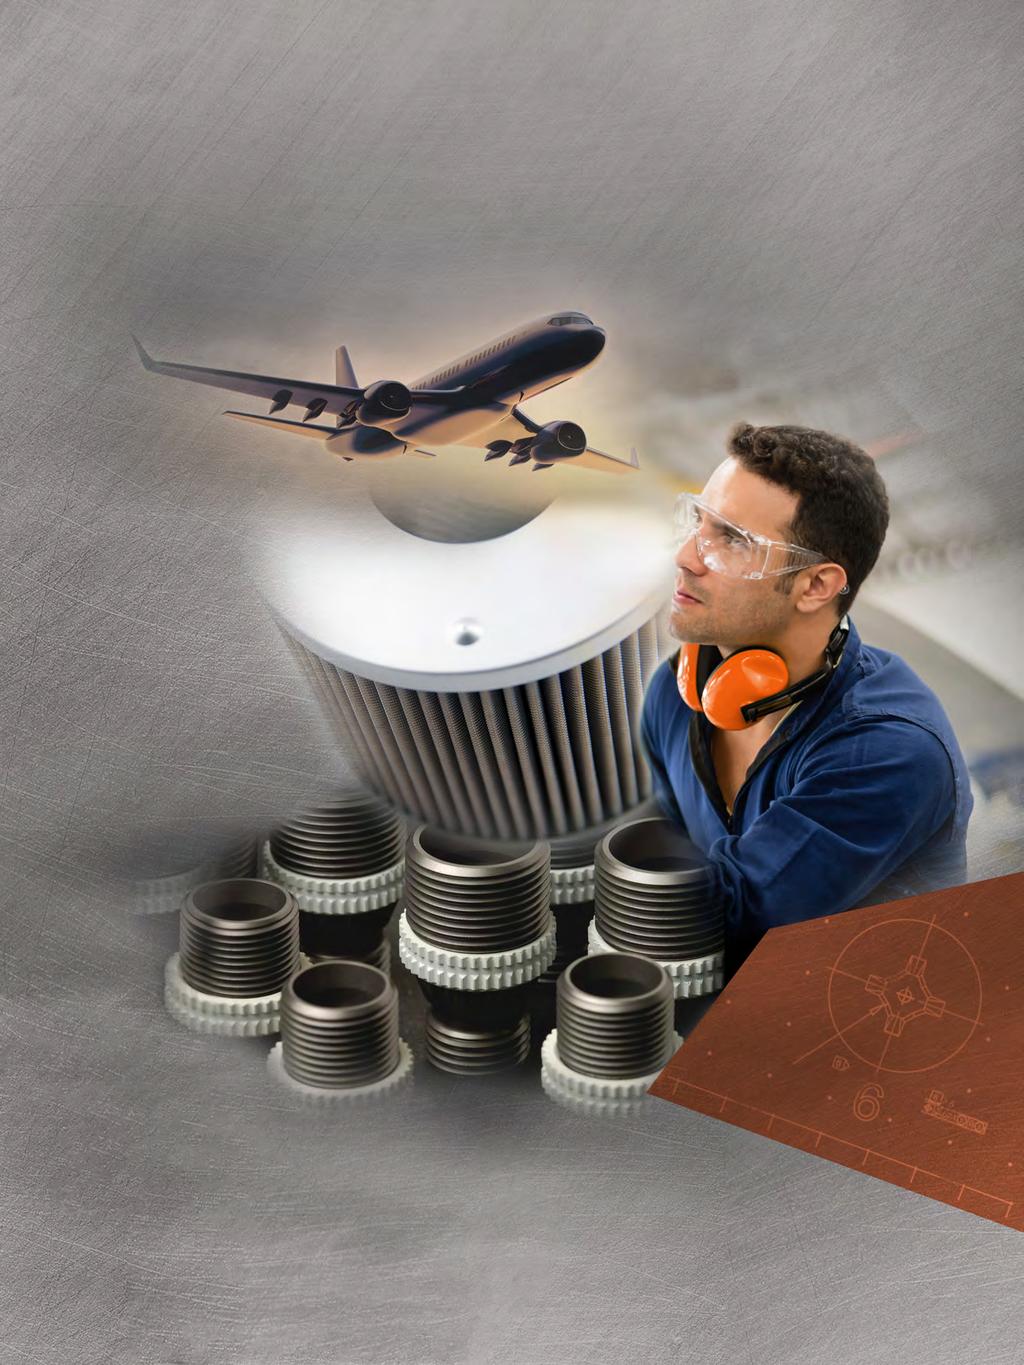 The world s leading supplier of aerospace fasteners and